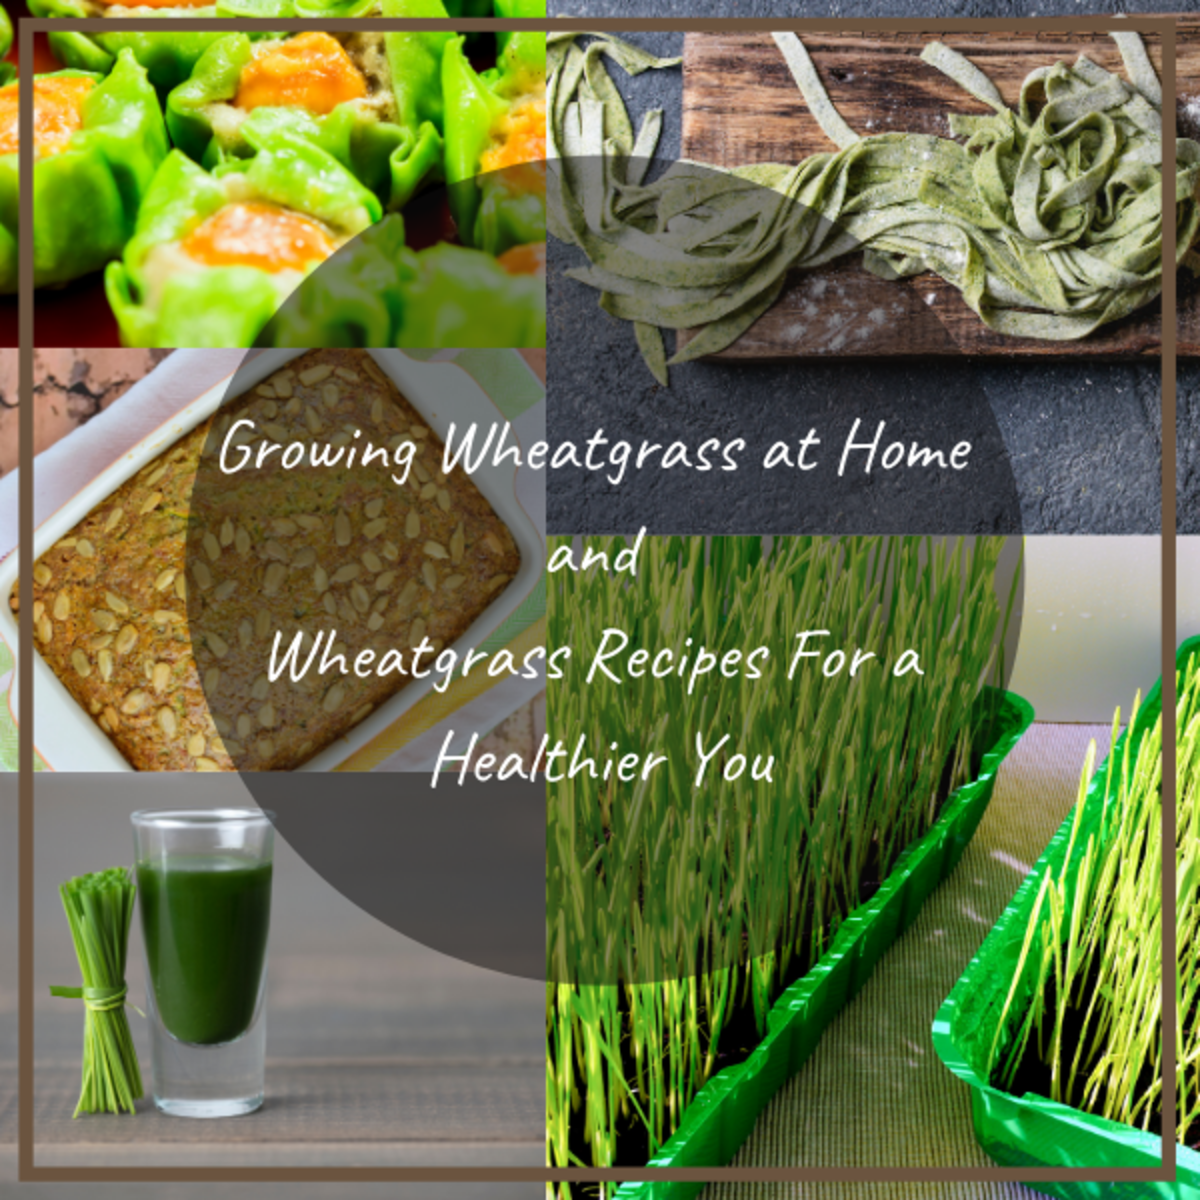 How To Grow Wheatgrass at Home (With Recipes)